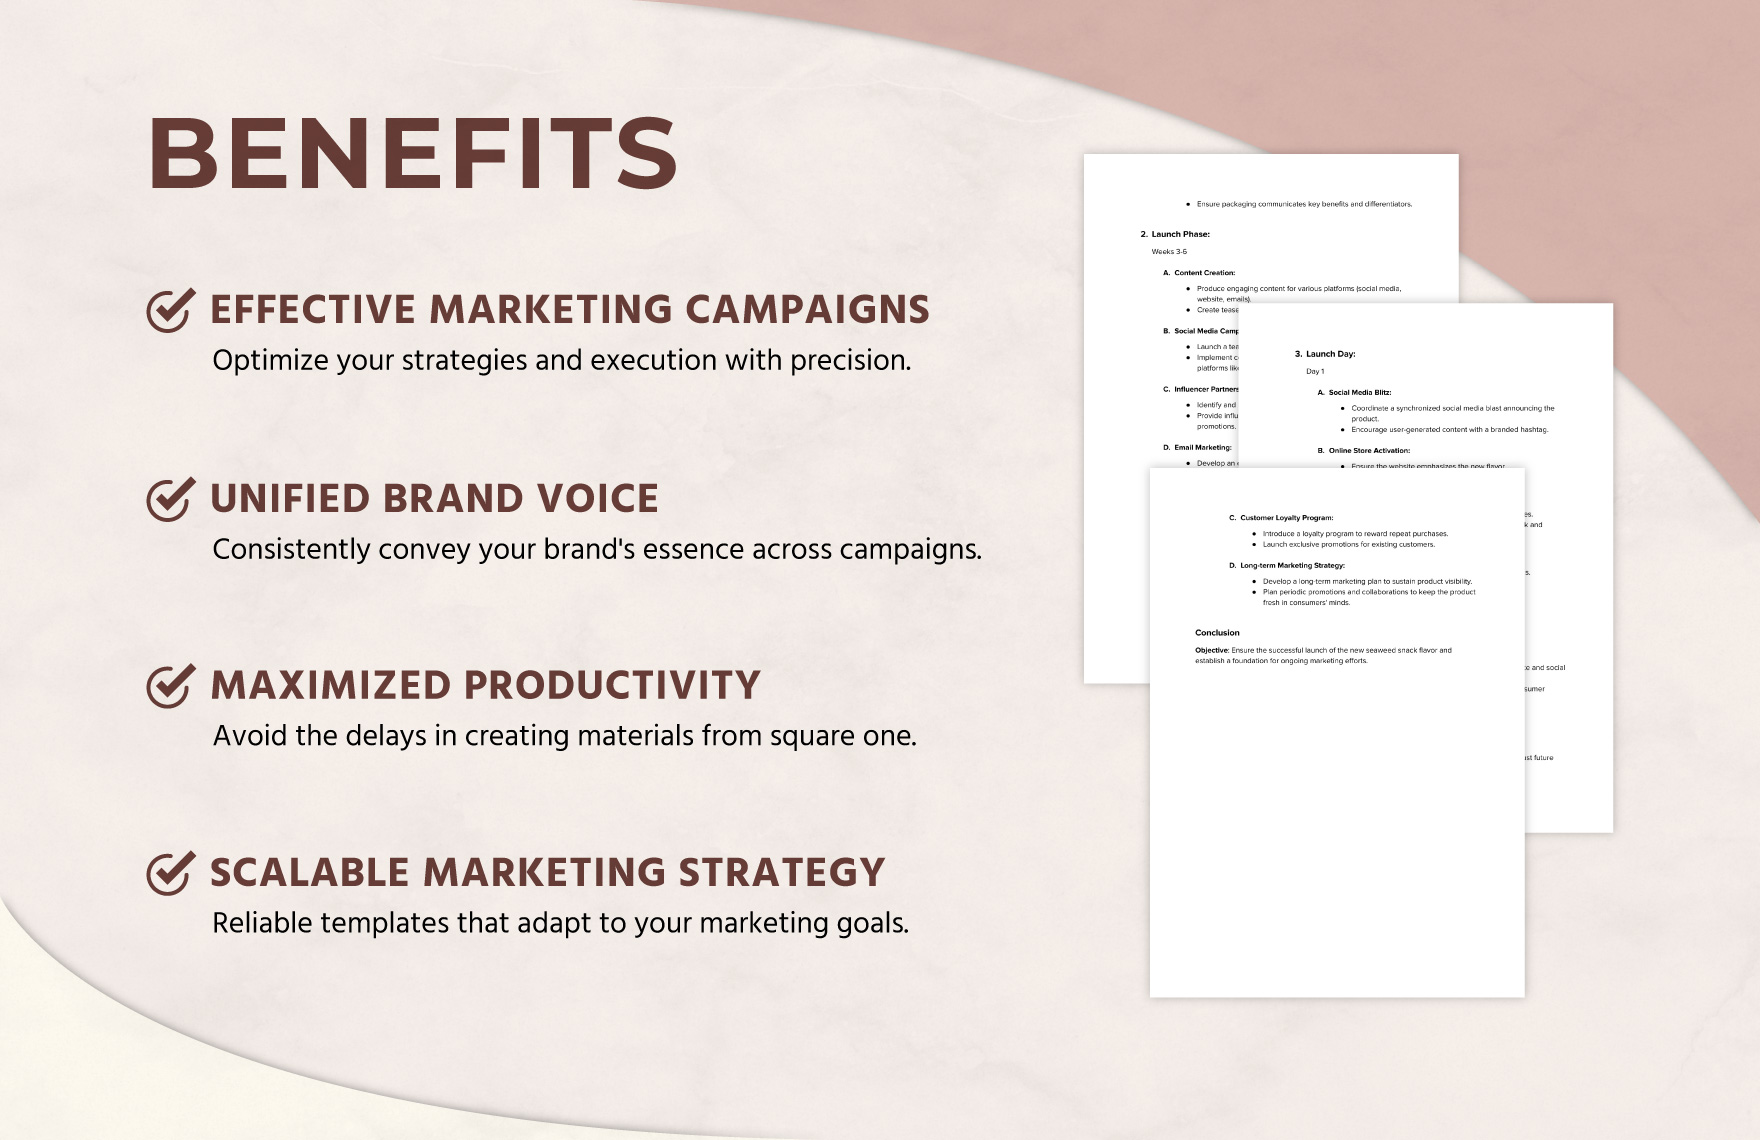 Marketing Product Marketing Schedule Template